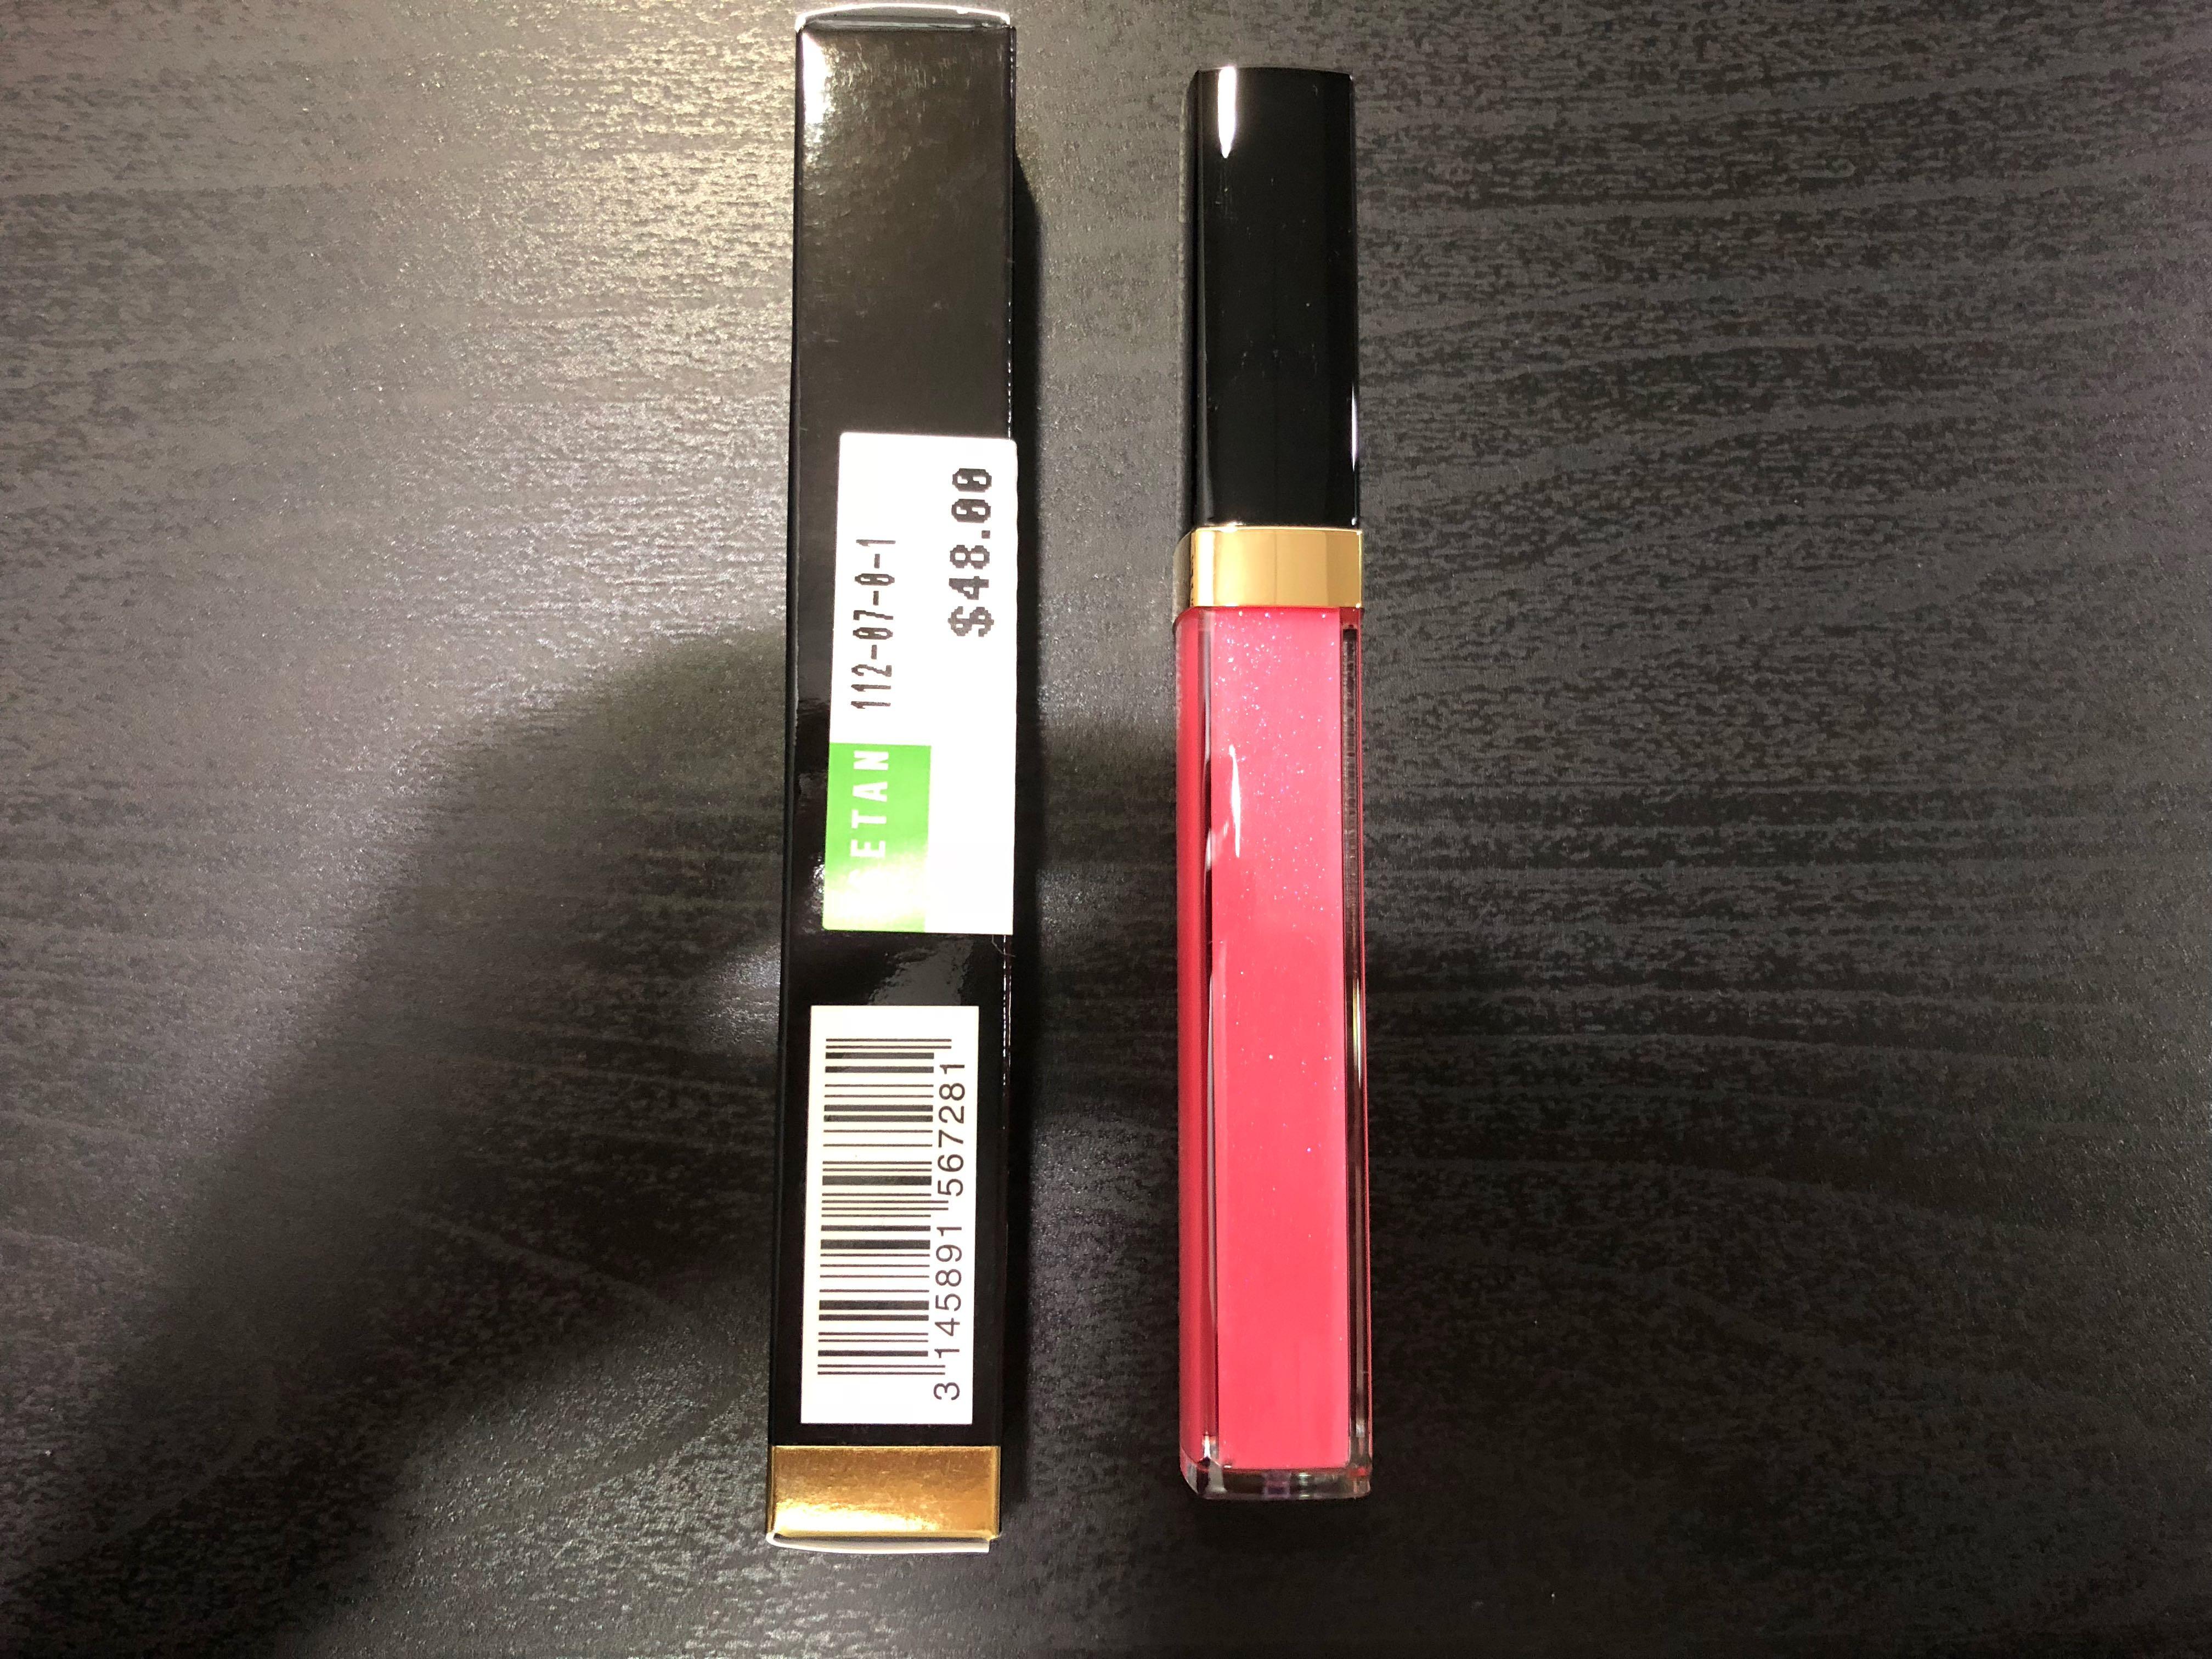 CHANEL ROUGE COCO GLOSS 728 ROSE PURPLE 187002928, Beauty